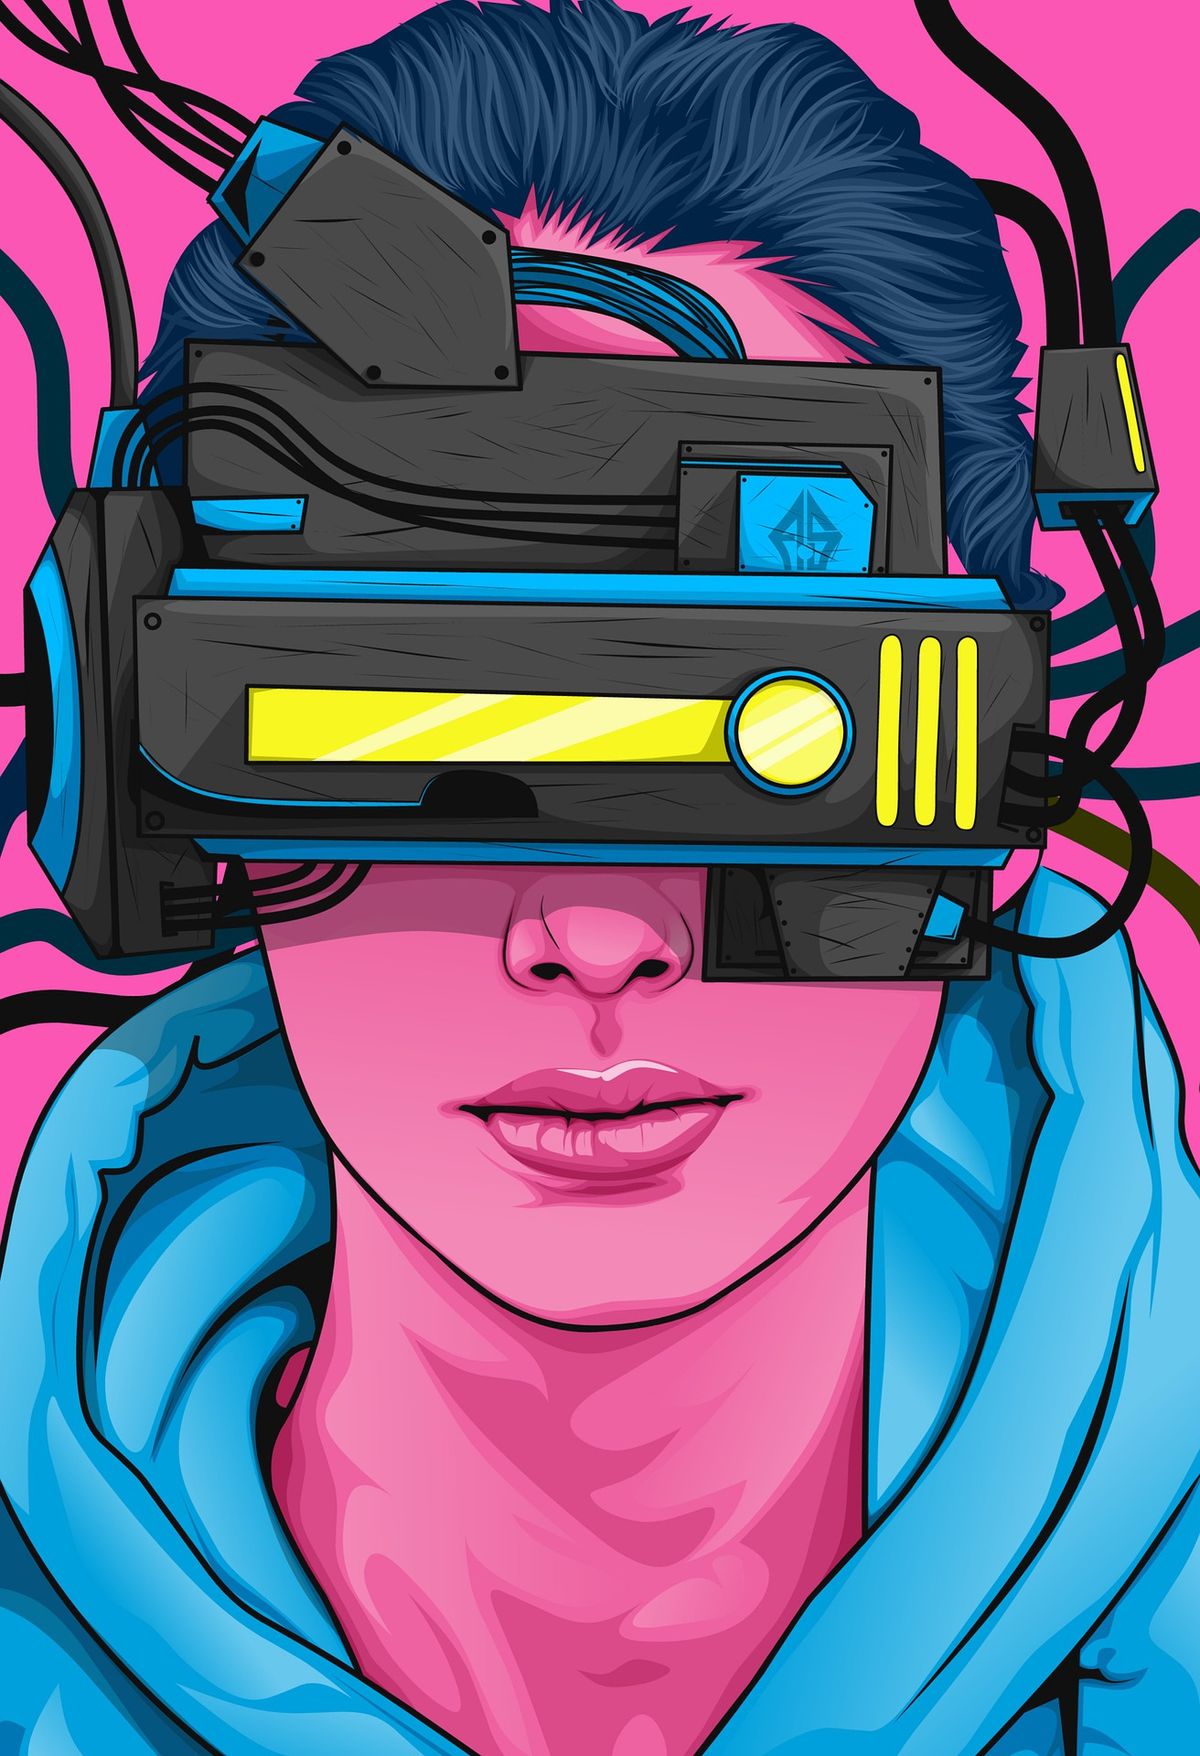 Education 2.0: How Virtual Reality Can Transform the Way We Learn